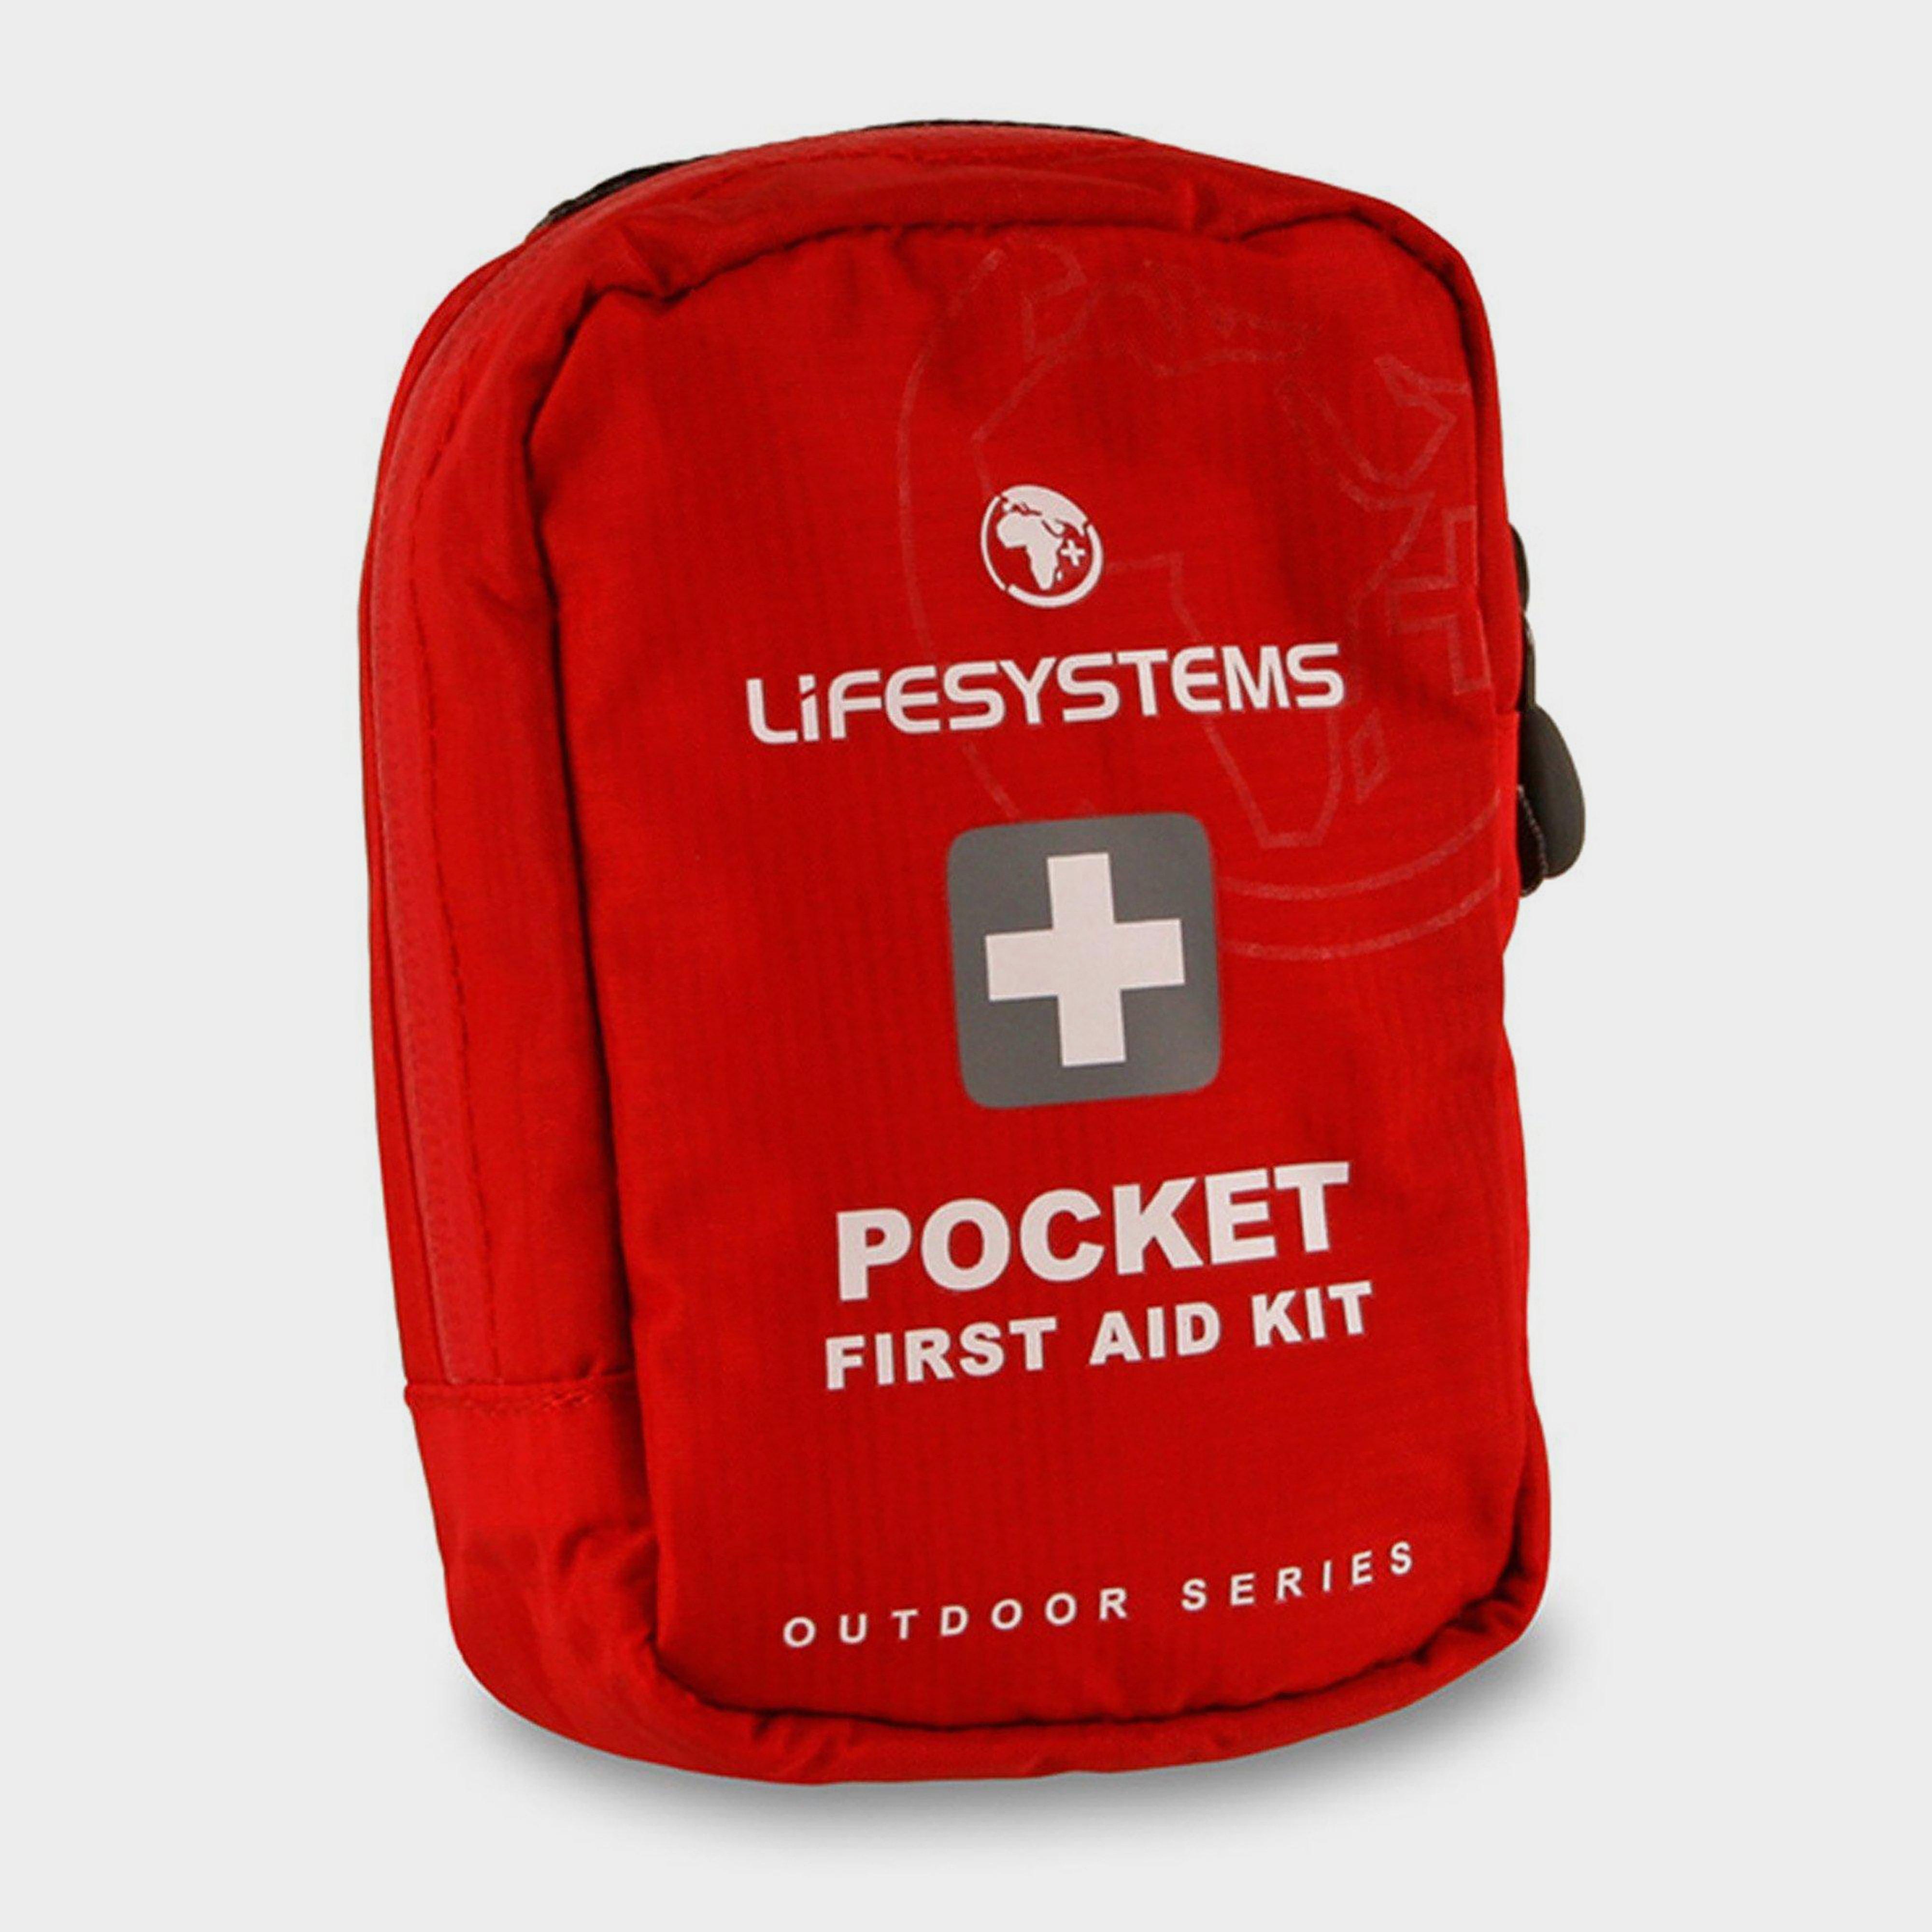 Lifesystems Pocket First Aid Kit - Red  Red